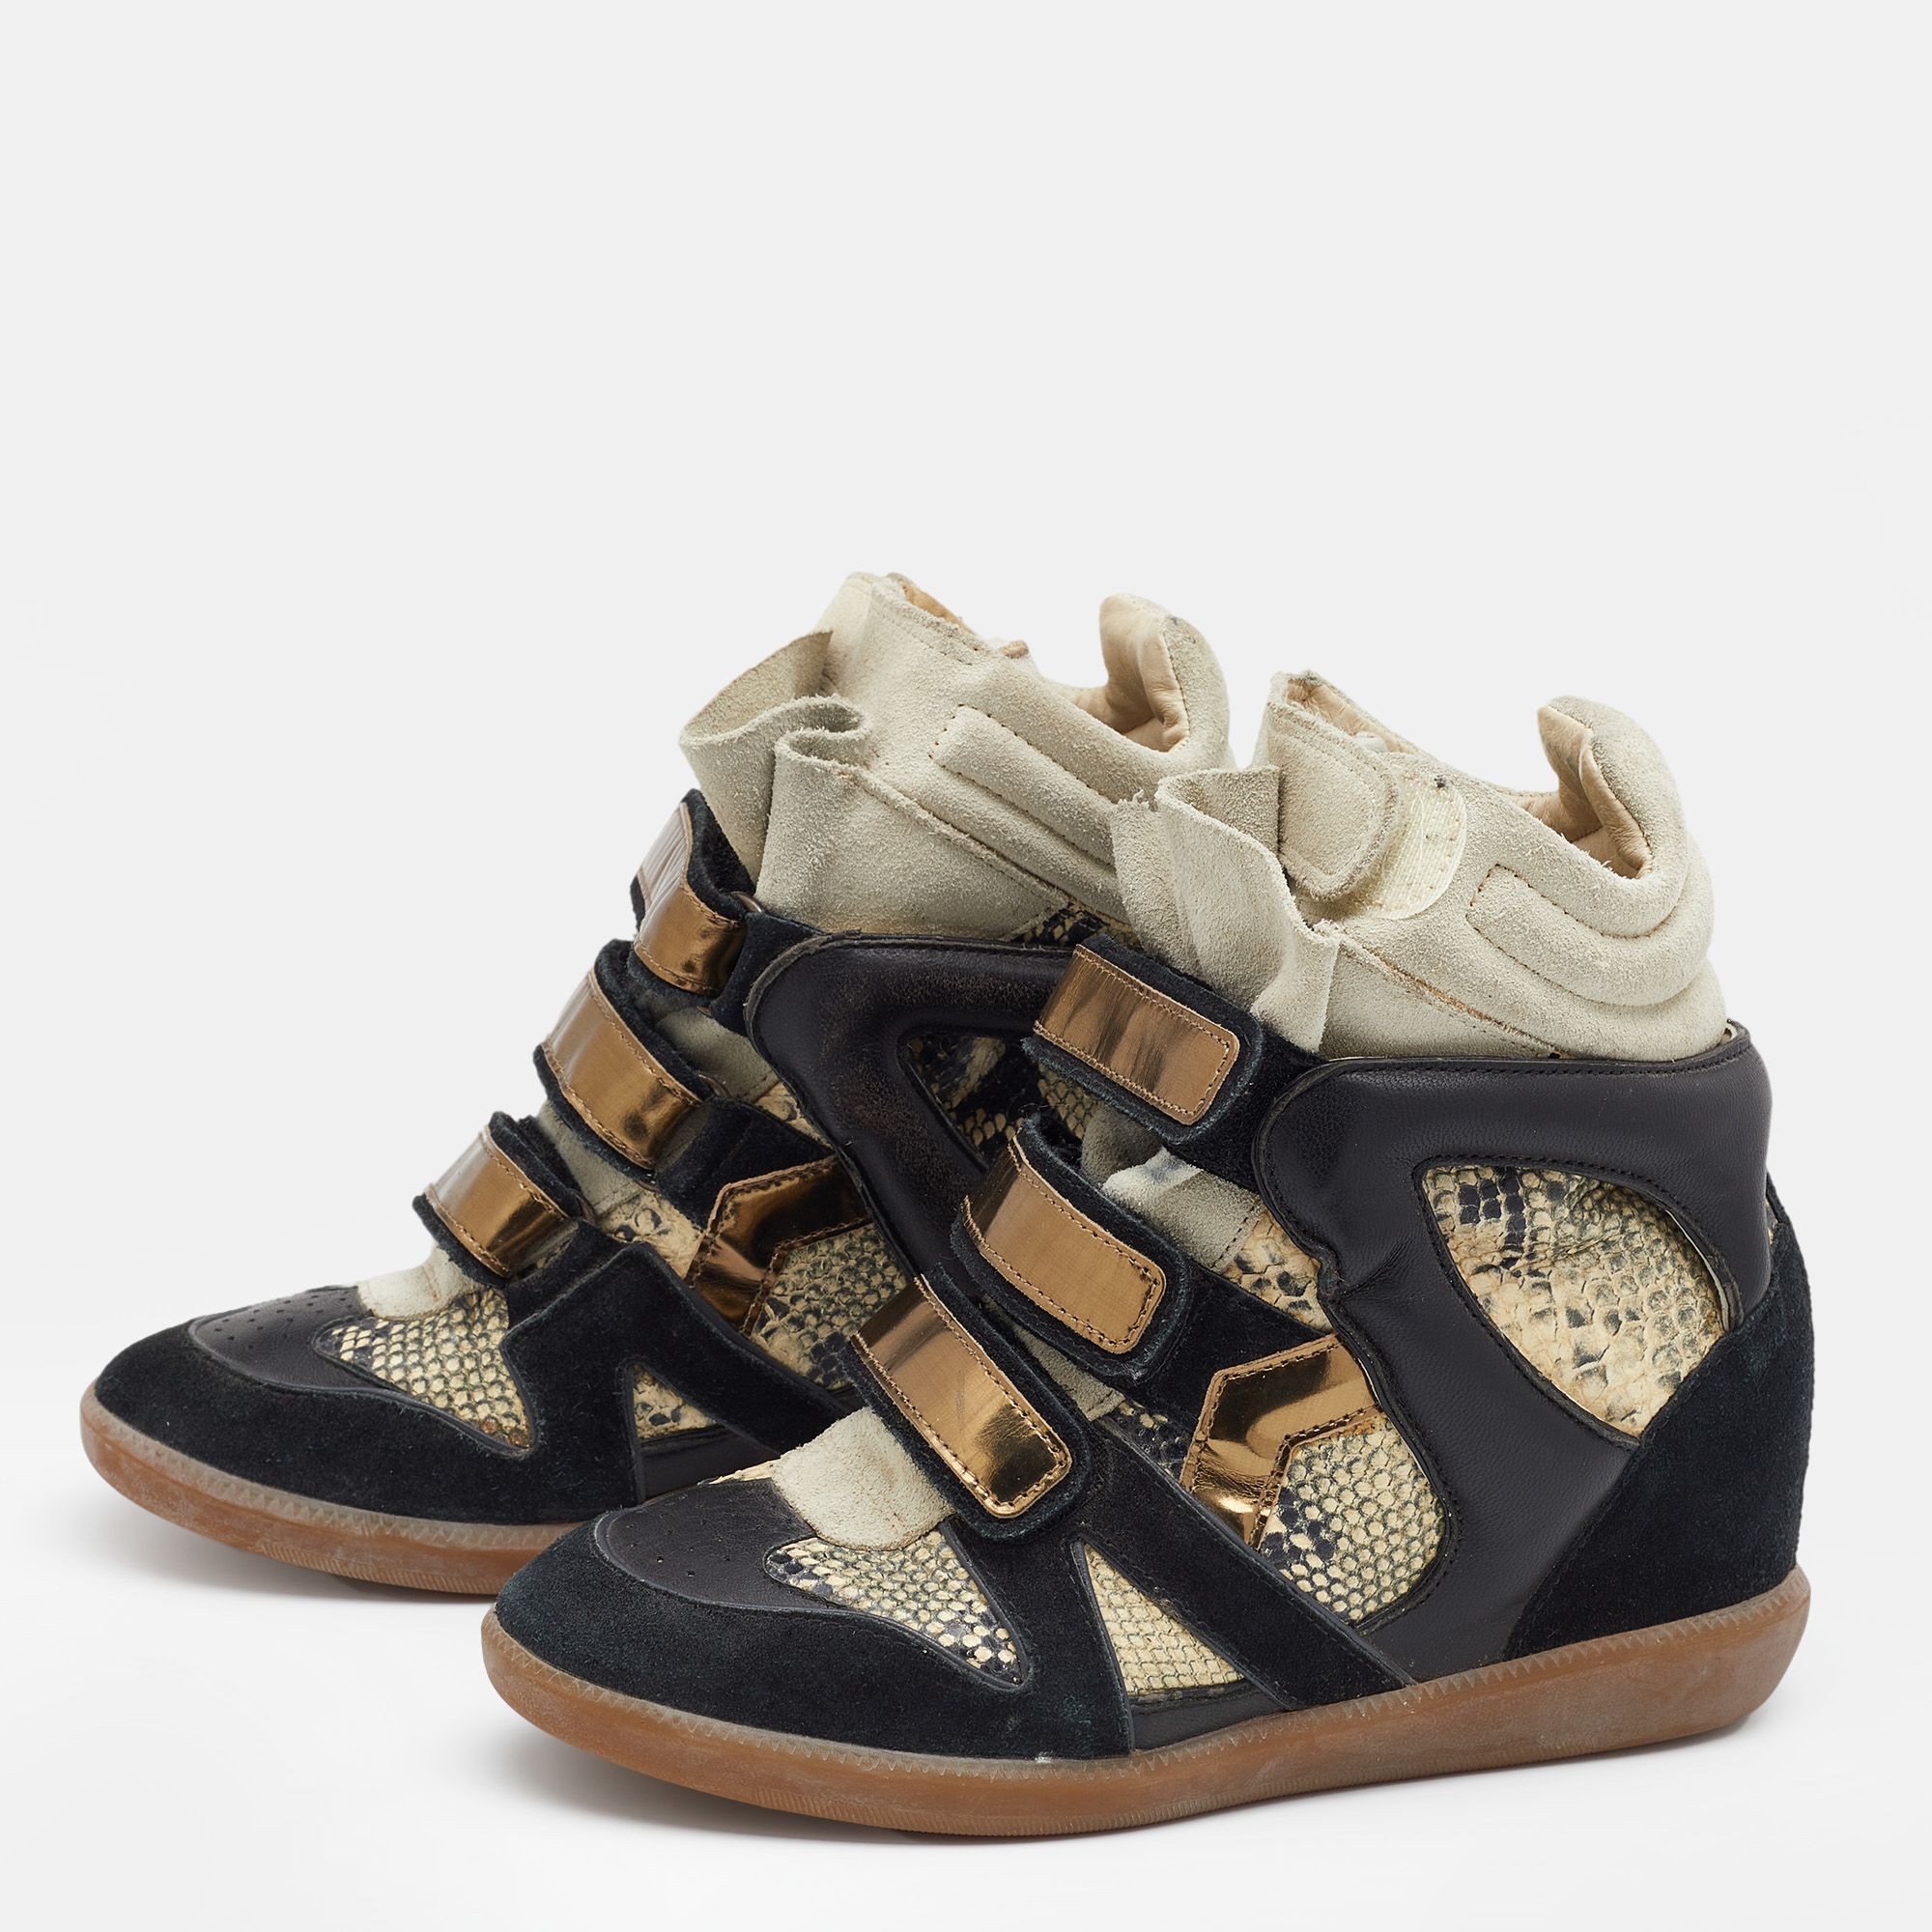 

Isabel Marant Multicolor Suede And Python Embossed Leather Beckett Wedge High Top Sneakers Size